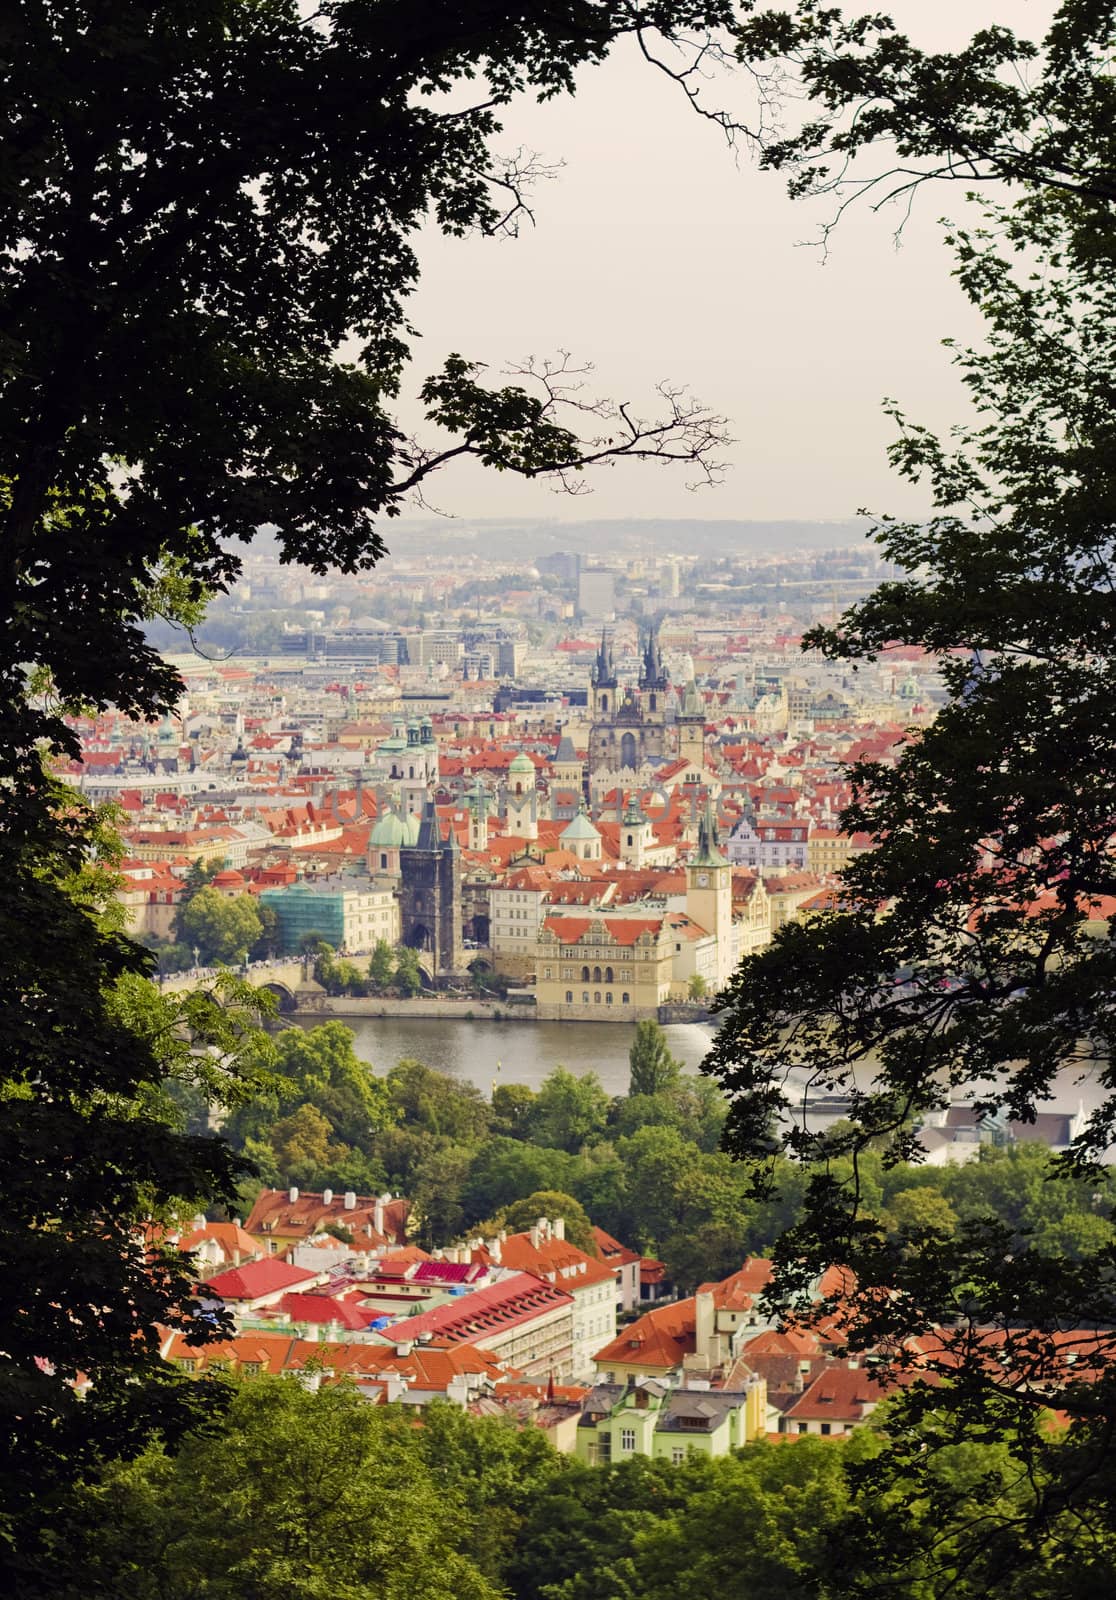 View of an Old town of Prague by Kristina_Usoltseva